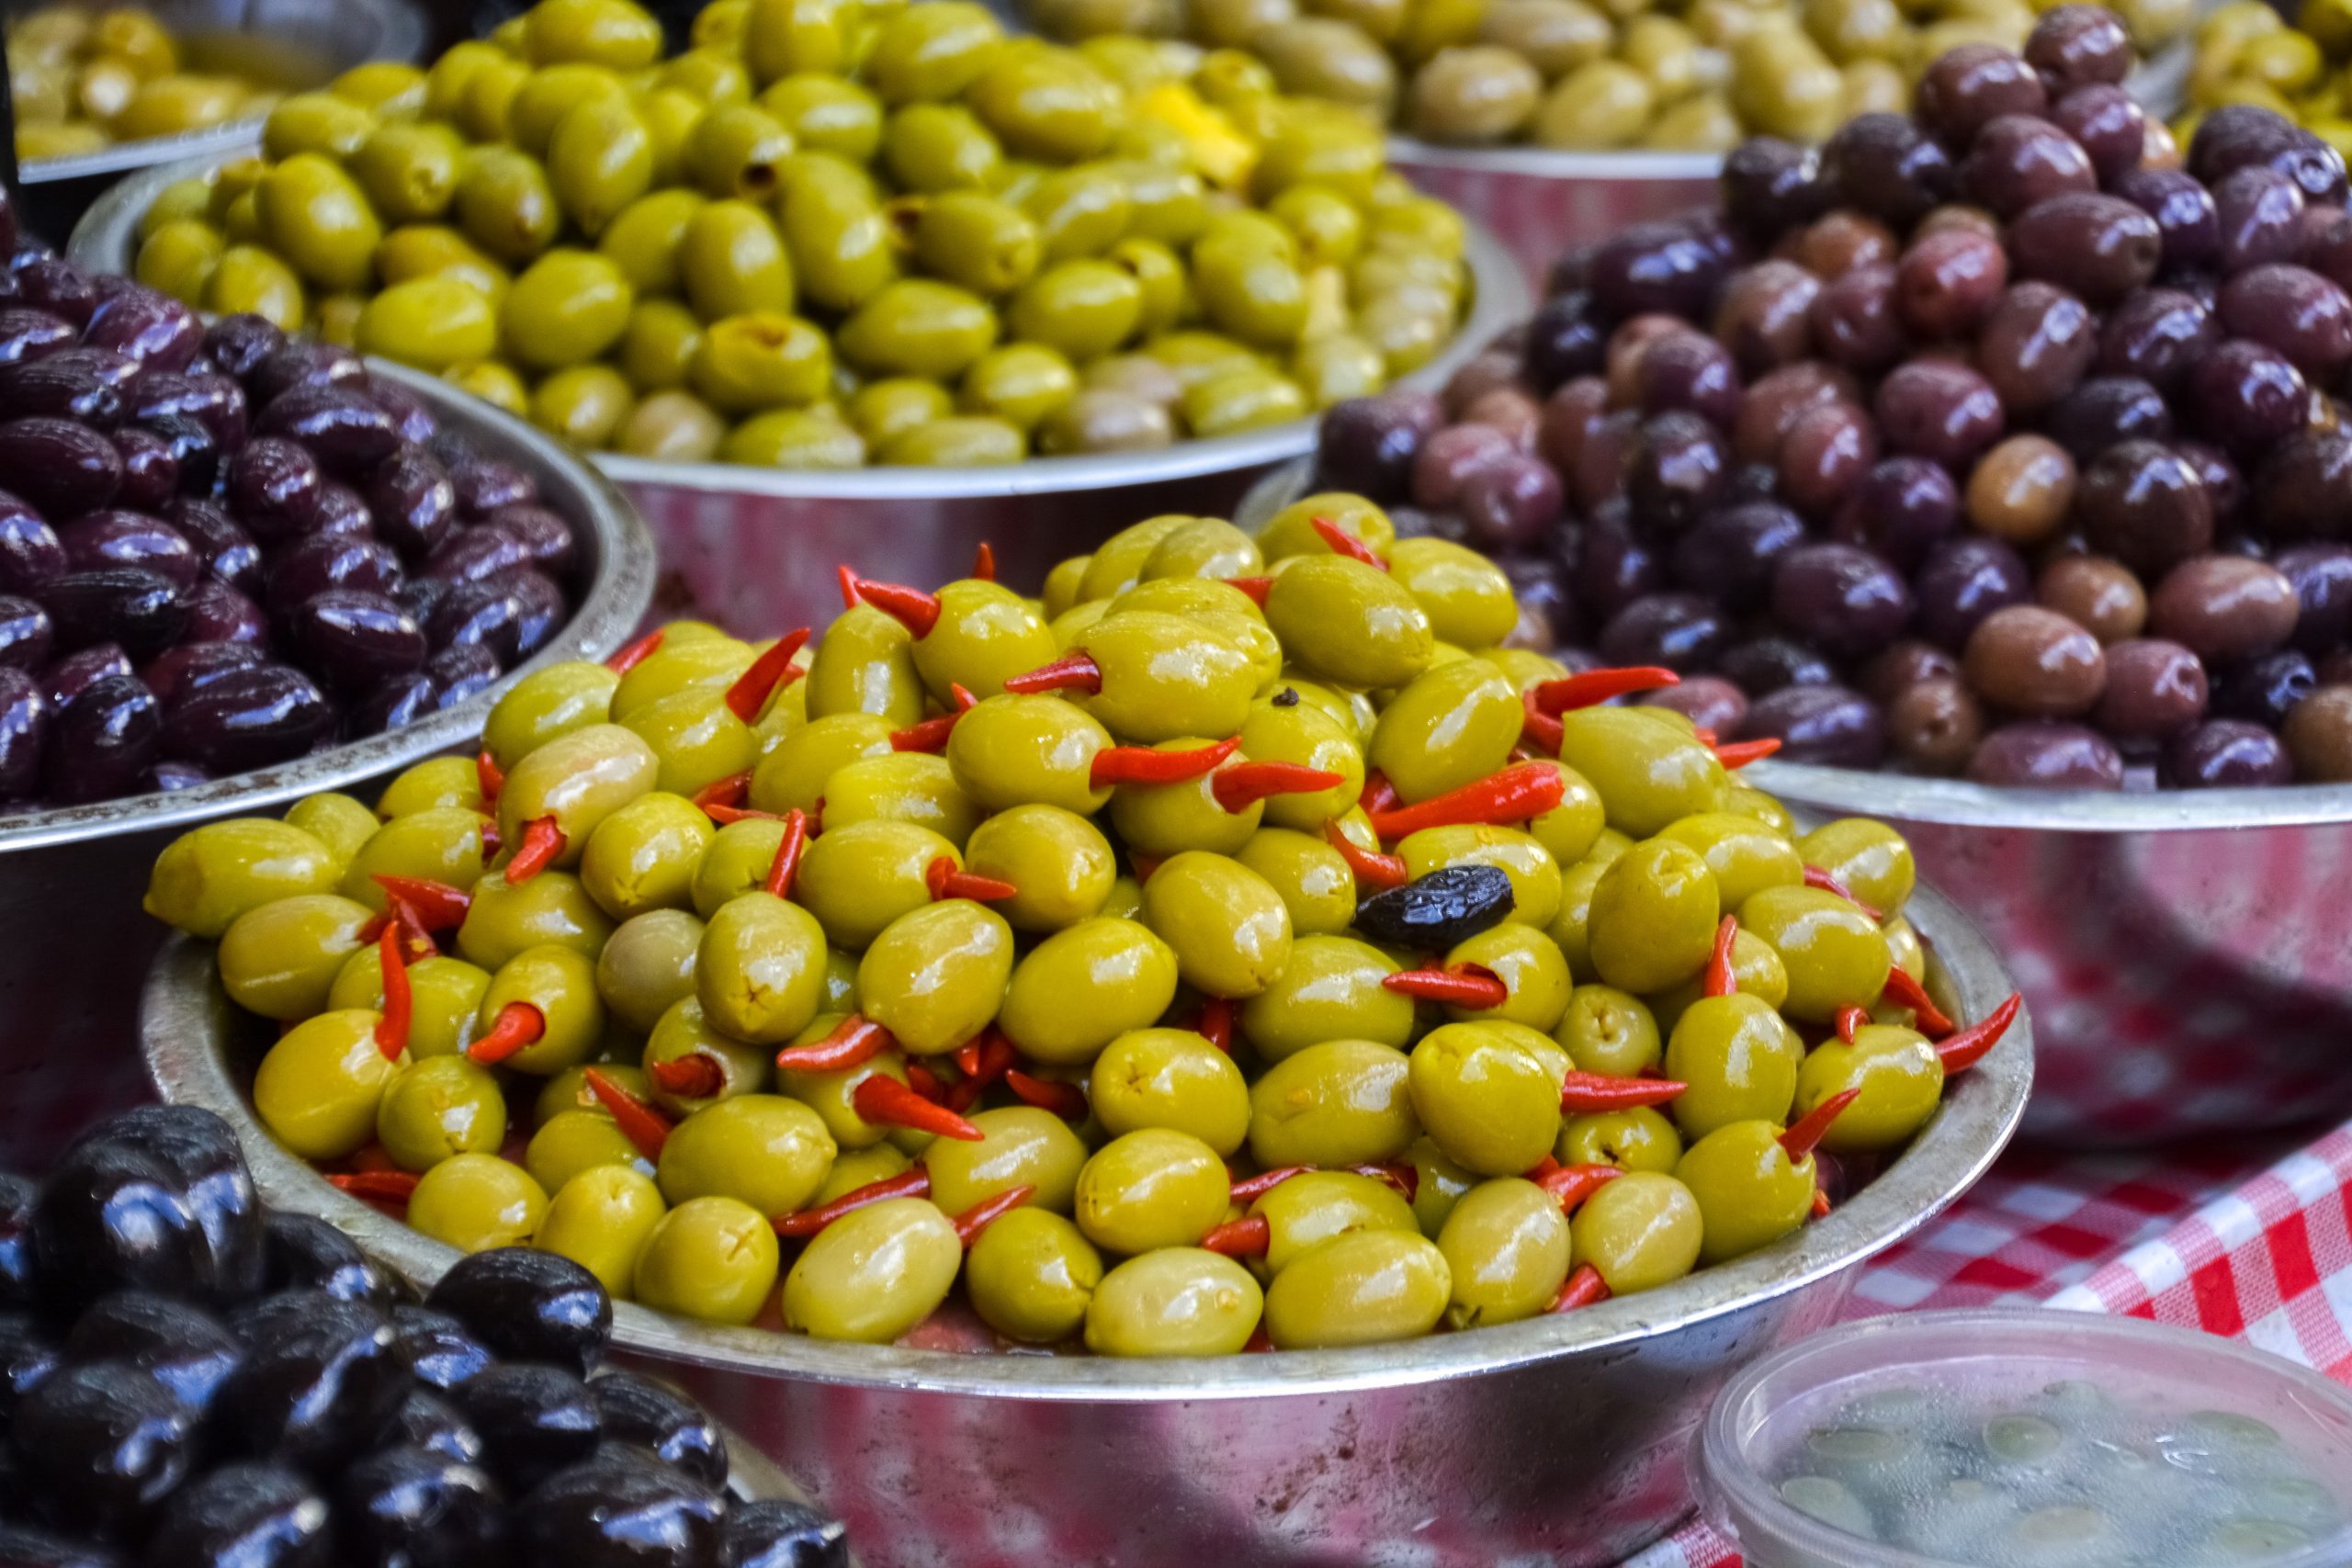 Few reasons why olives are the ideal healthy snack